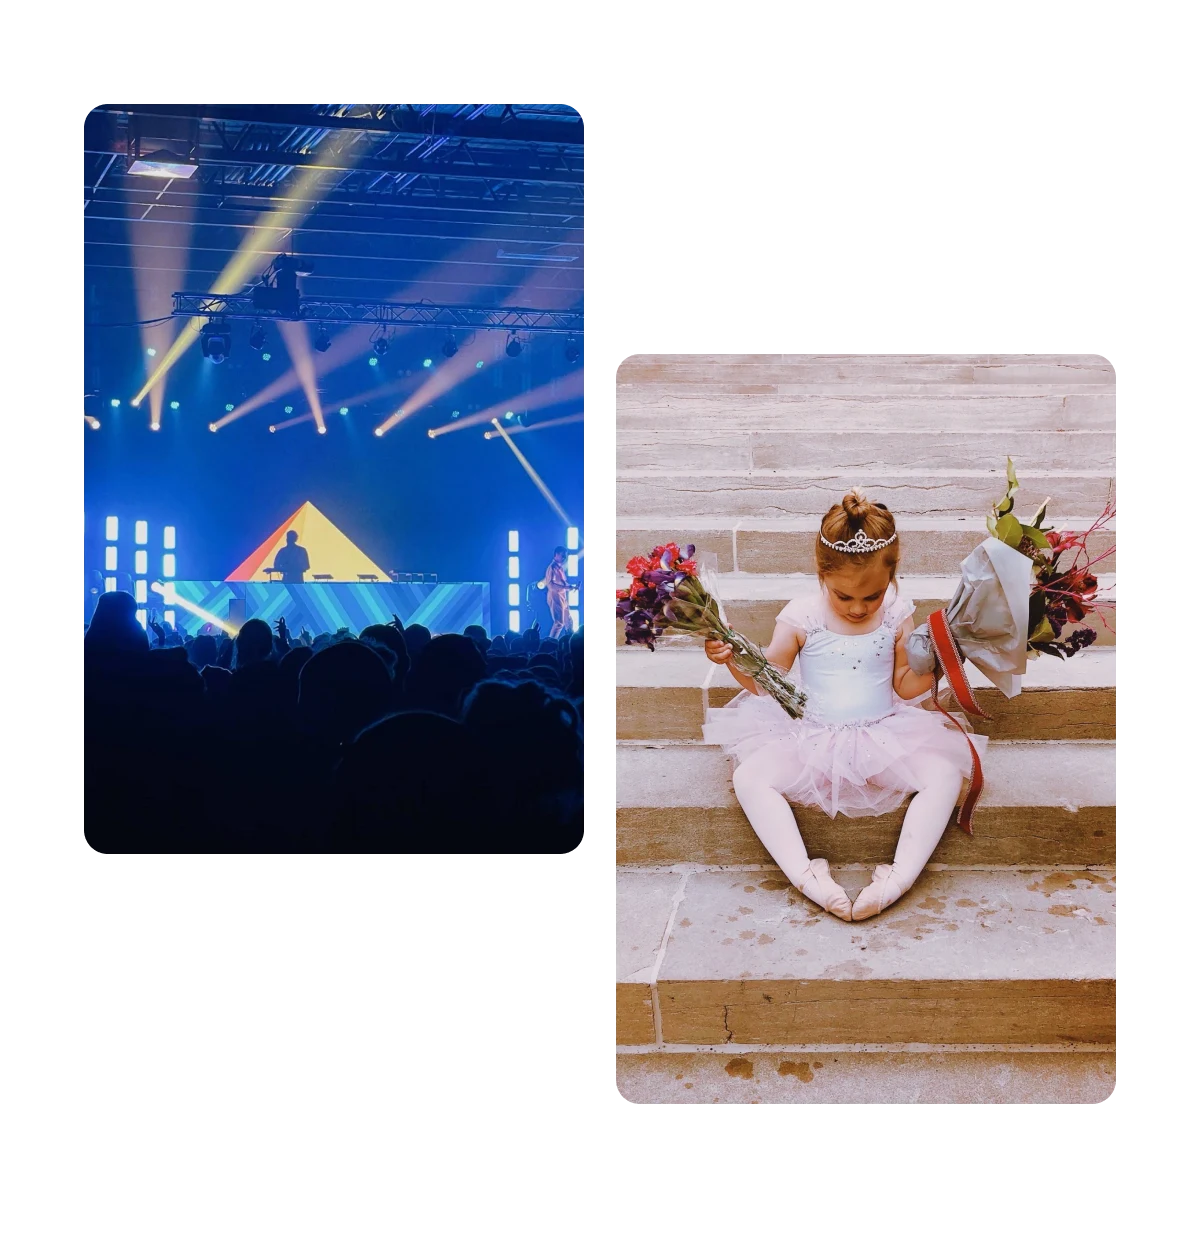 Two pins, crowd listening to dj on stage, young ballerina with flowers